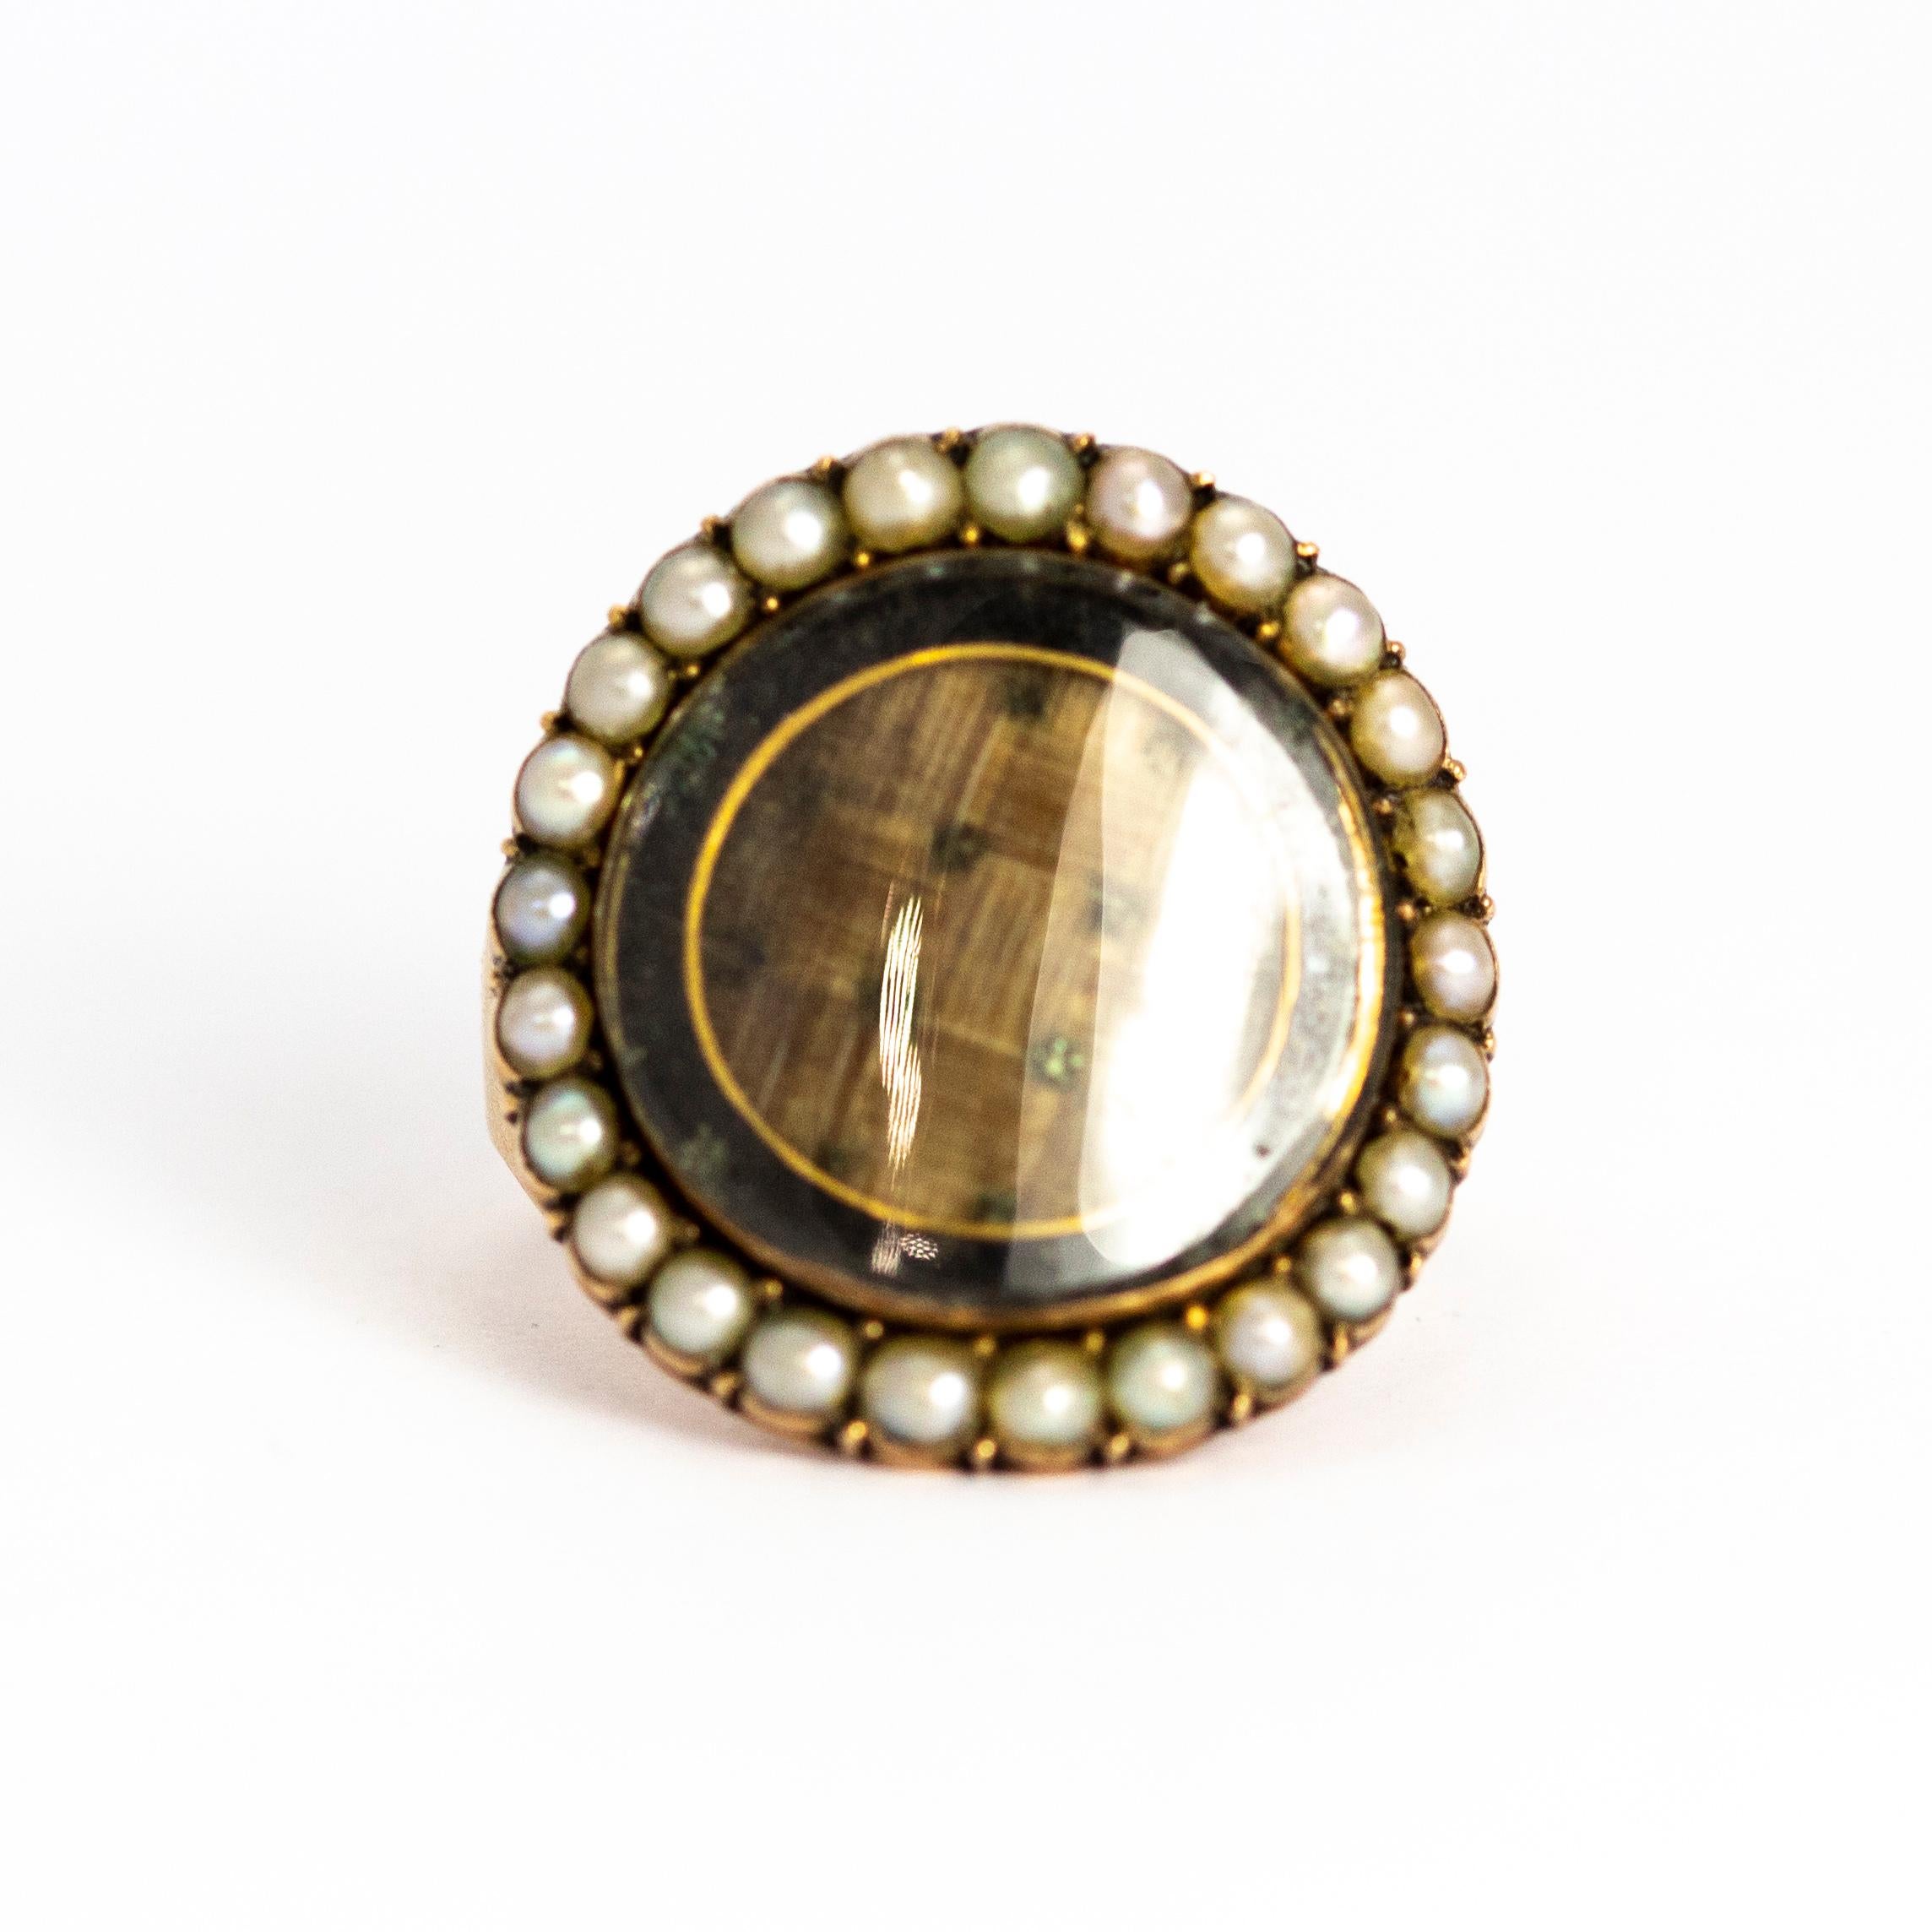 A superb antique Georgian mourning ring. The large circular glazed locket front is set with woven hair and black enamel, bordered with beautiful pearls. Modelled in 9 karat yellow gold. The inscription on the inside of the band reads 